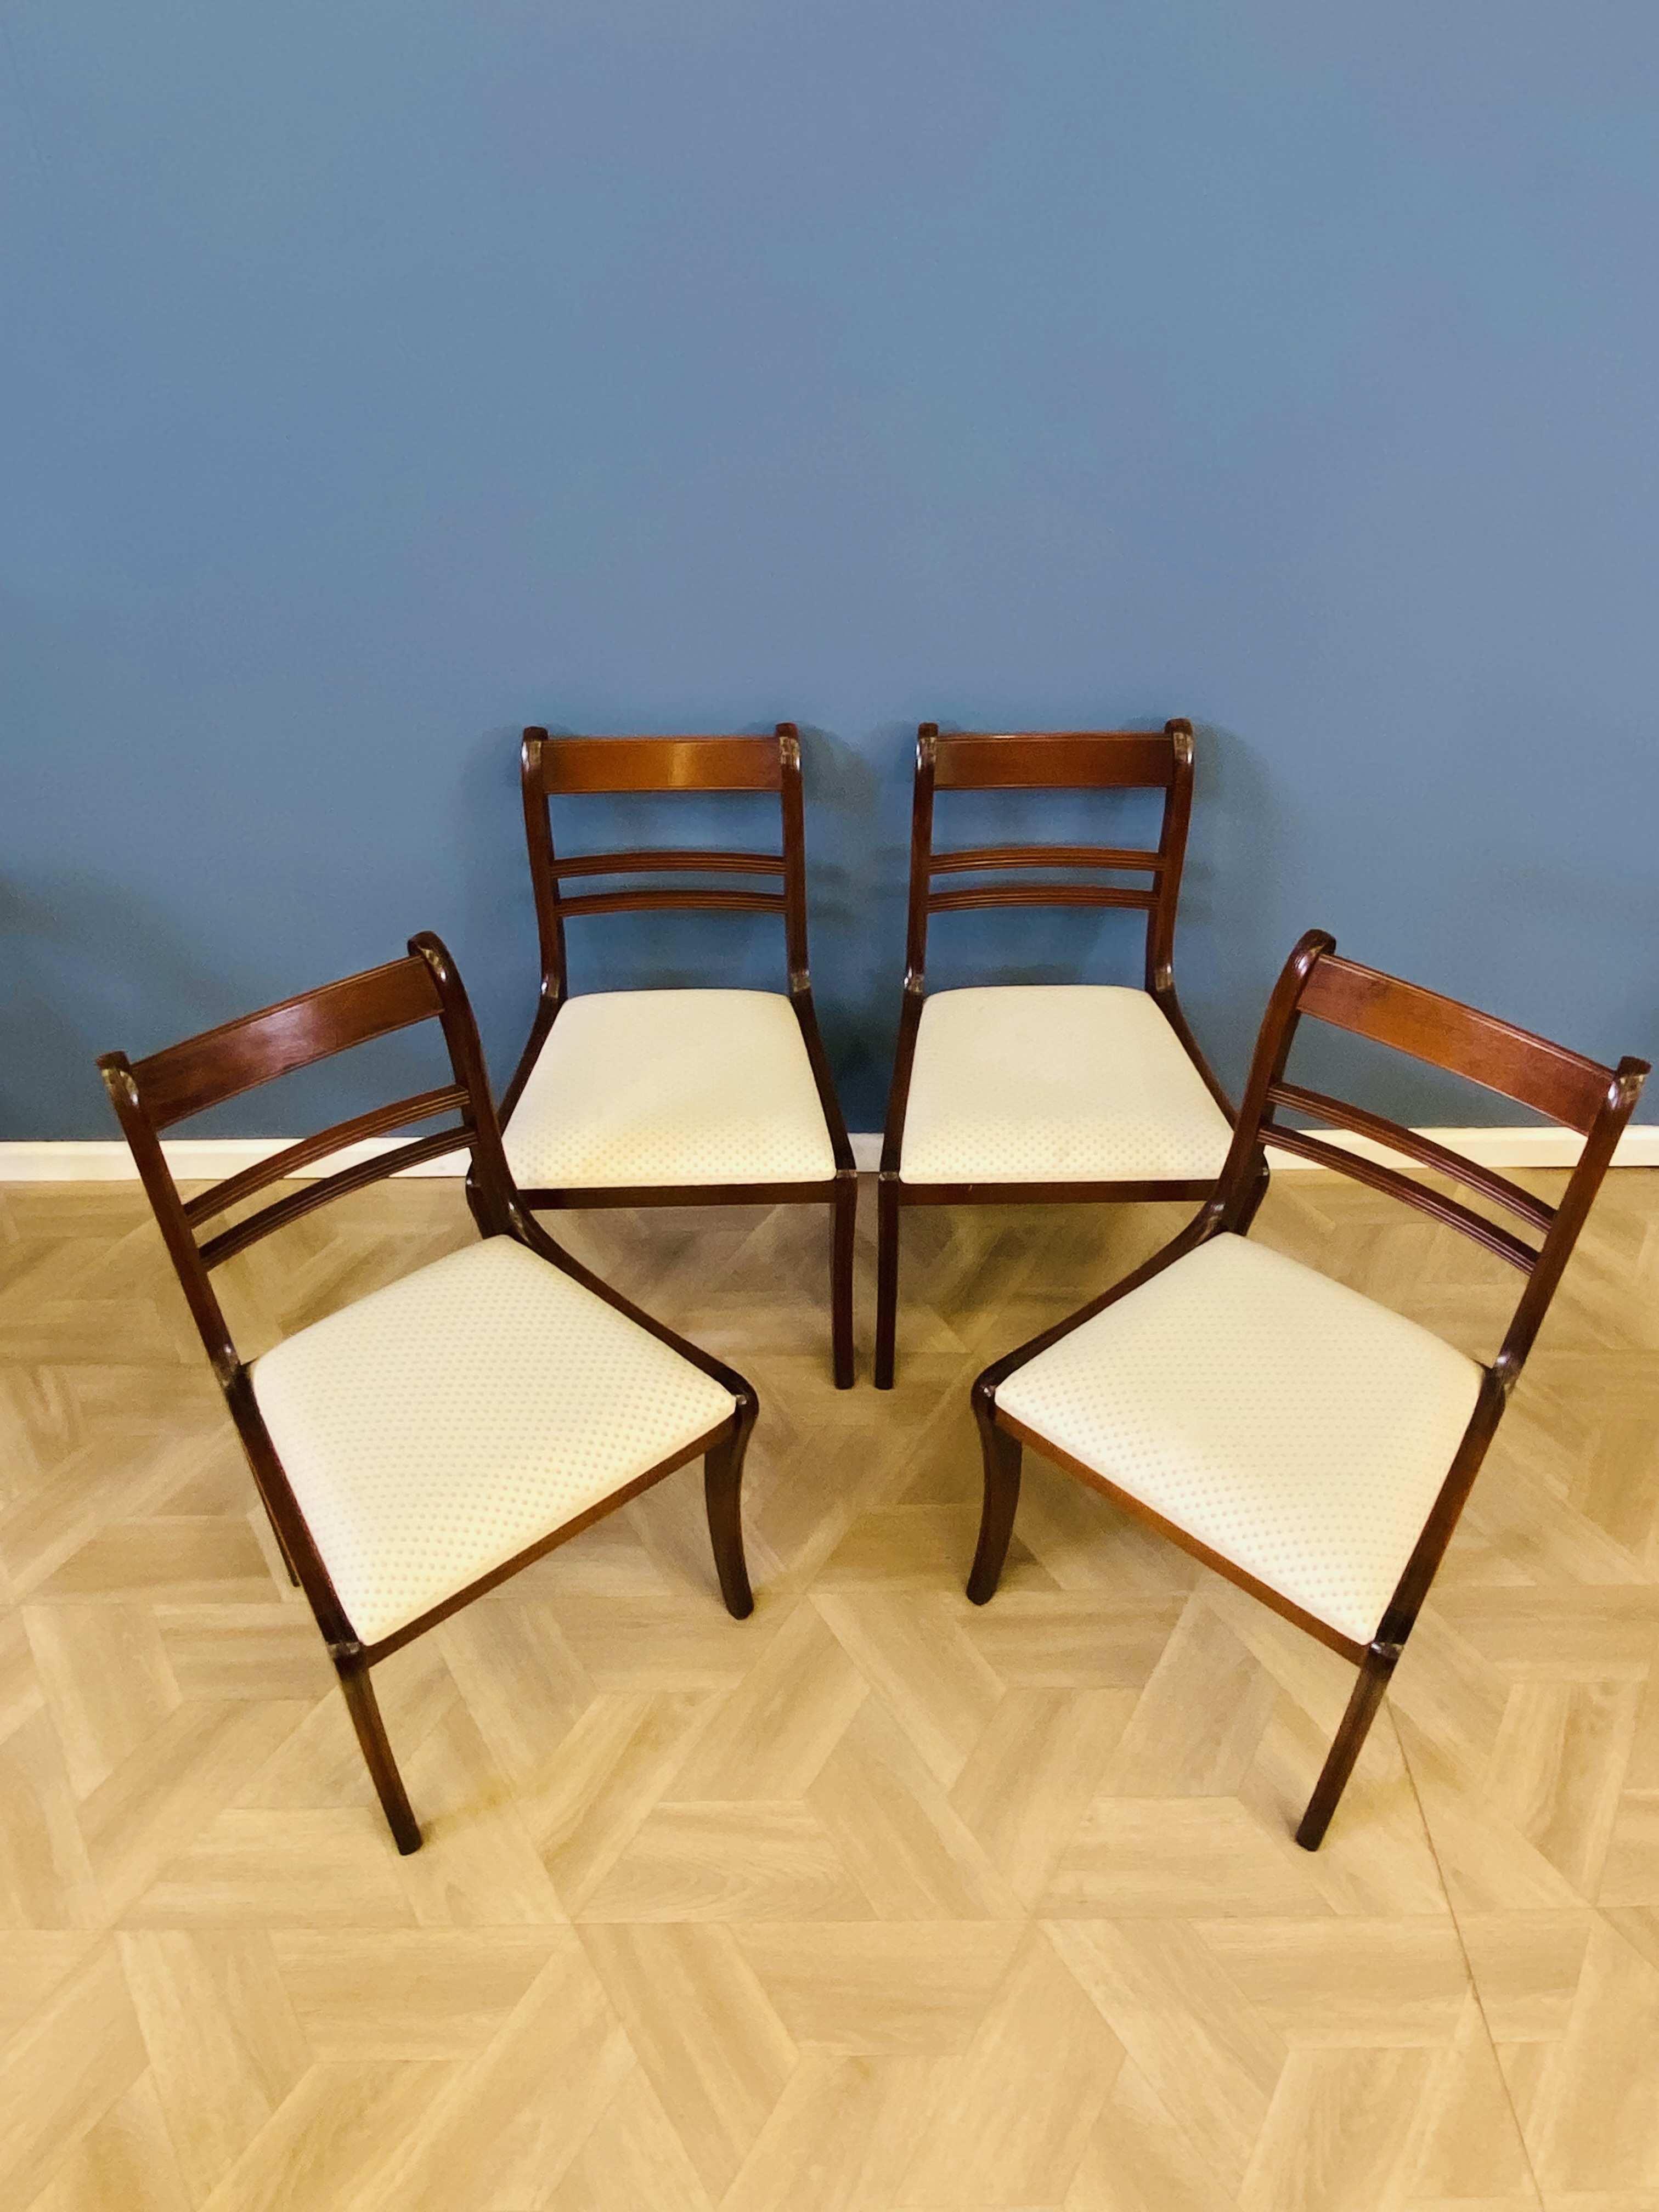 Set of six mahogany Regency style dining chairs - Image 7 of 7